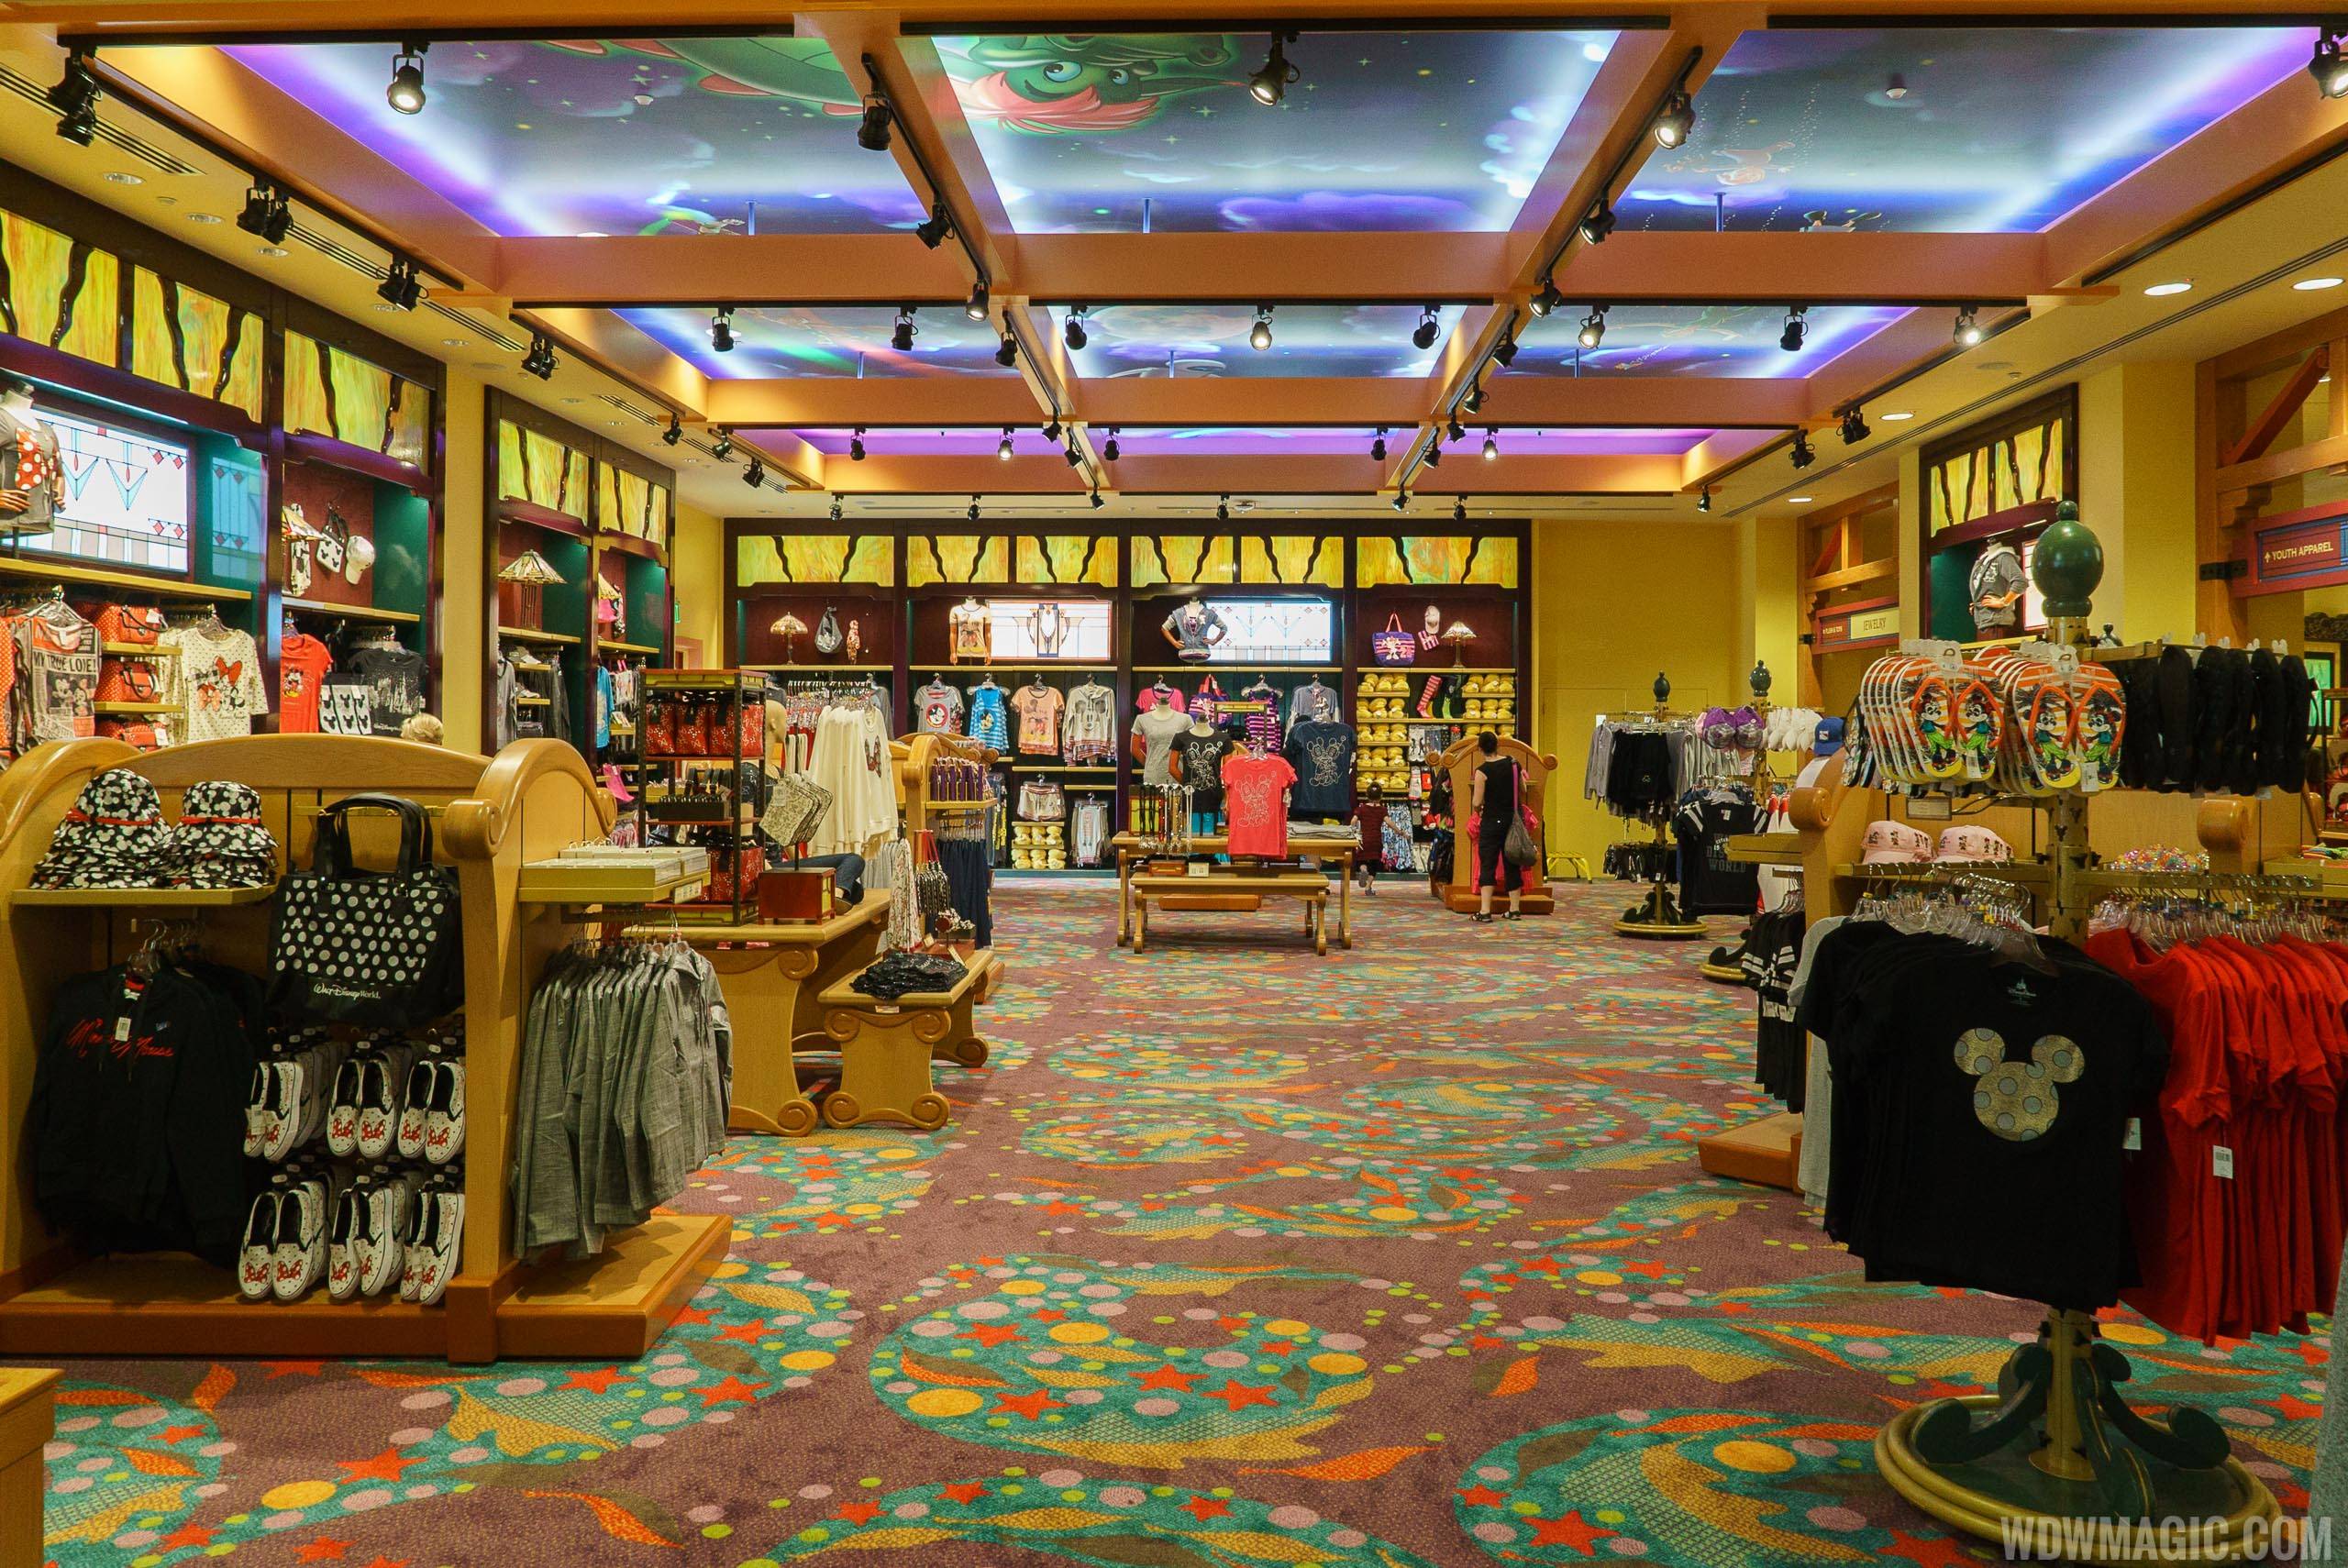 PHOTOS - New World of Disney expansion now open at Disney Springs